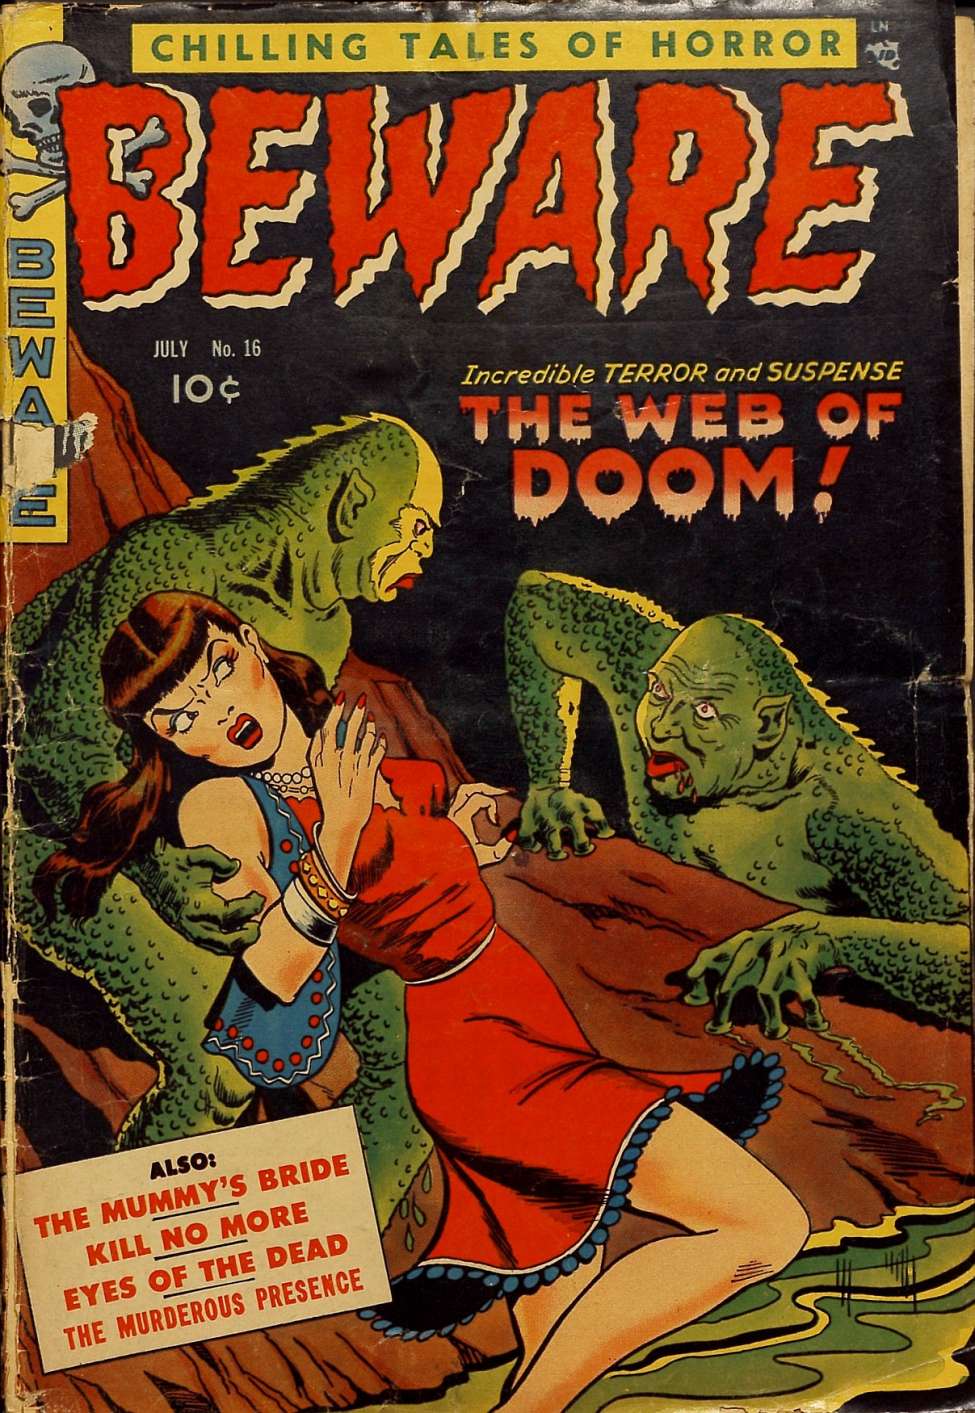 Book Cover For Beware 4